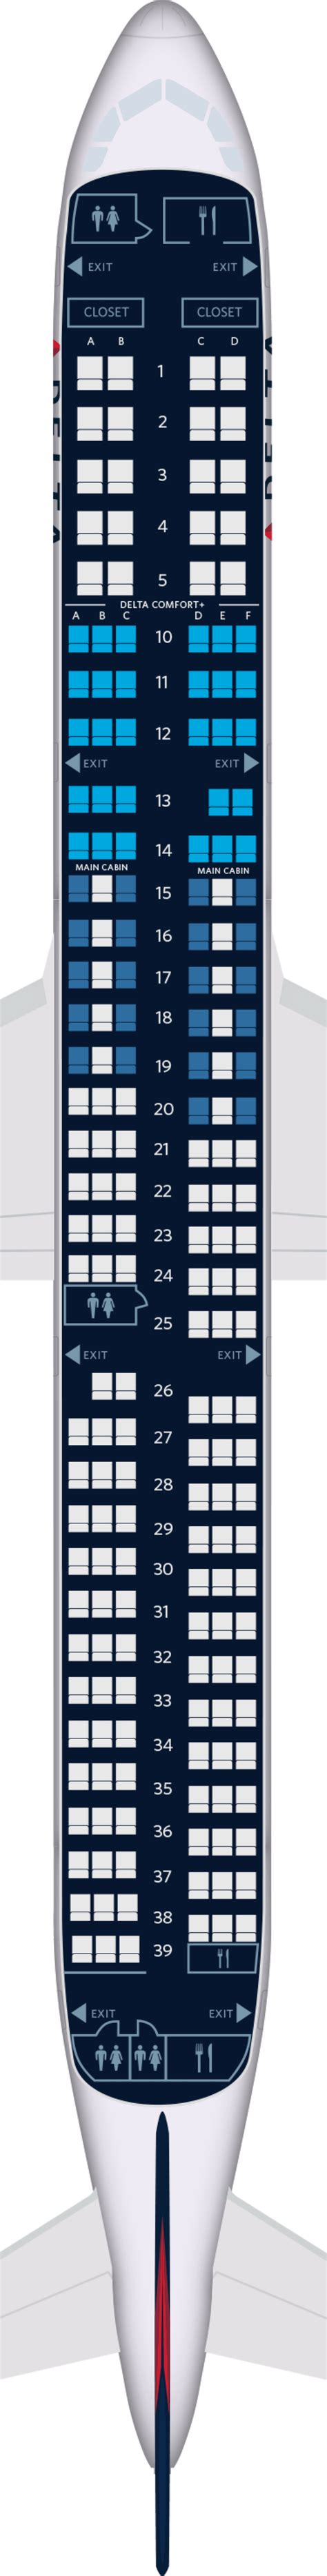 Overview. Spirit's A321 aircraft flies in a one class configuration with 8 "Big Front" seats and 220 "Deluxe Leather" Economy Seats. Spirit's A321 aircraft feature seats with no recline and 28 inches of seat pitch - the least amount of space of all US domestic carriers. Spirit's A321 offers two rows of "Big Front" seats which are larger seats ... . 